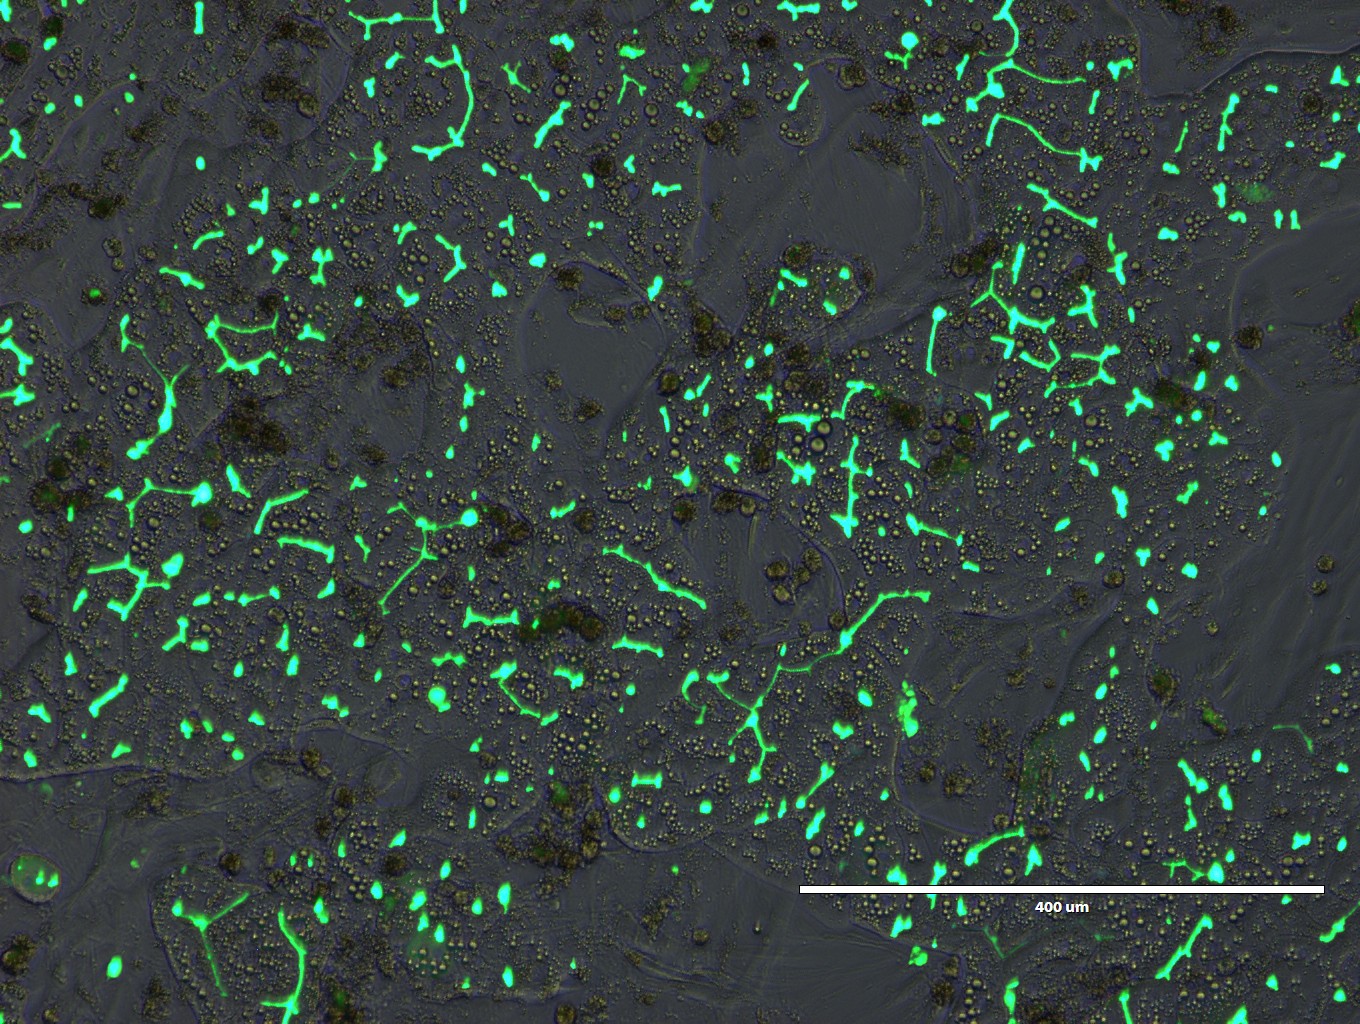 LifeNet Health LifeSciences all-human Hepatic Tri-Culture system stained to show bile canaliculi formation at 100X Magnification